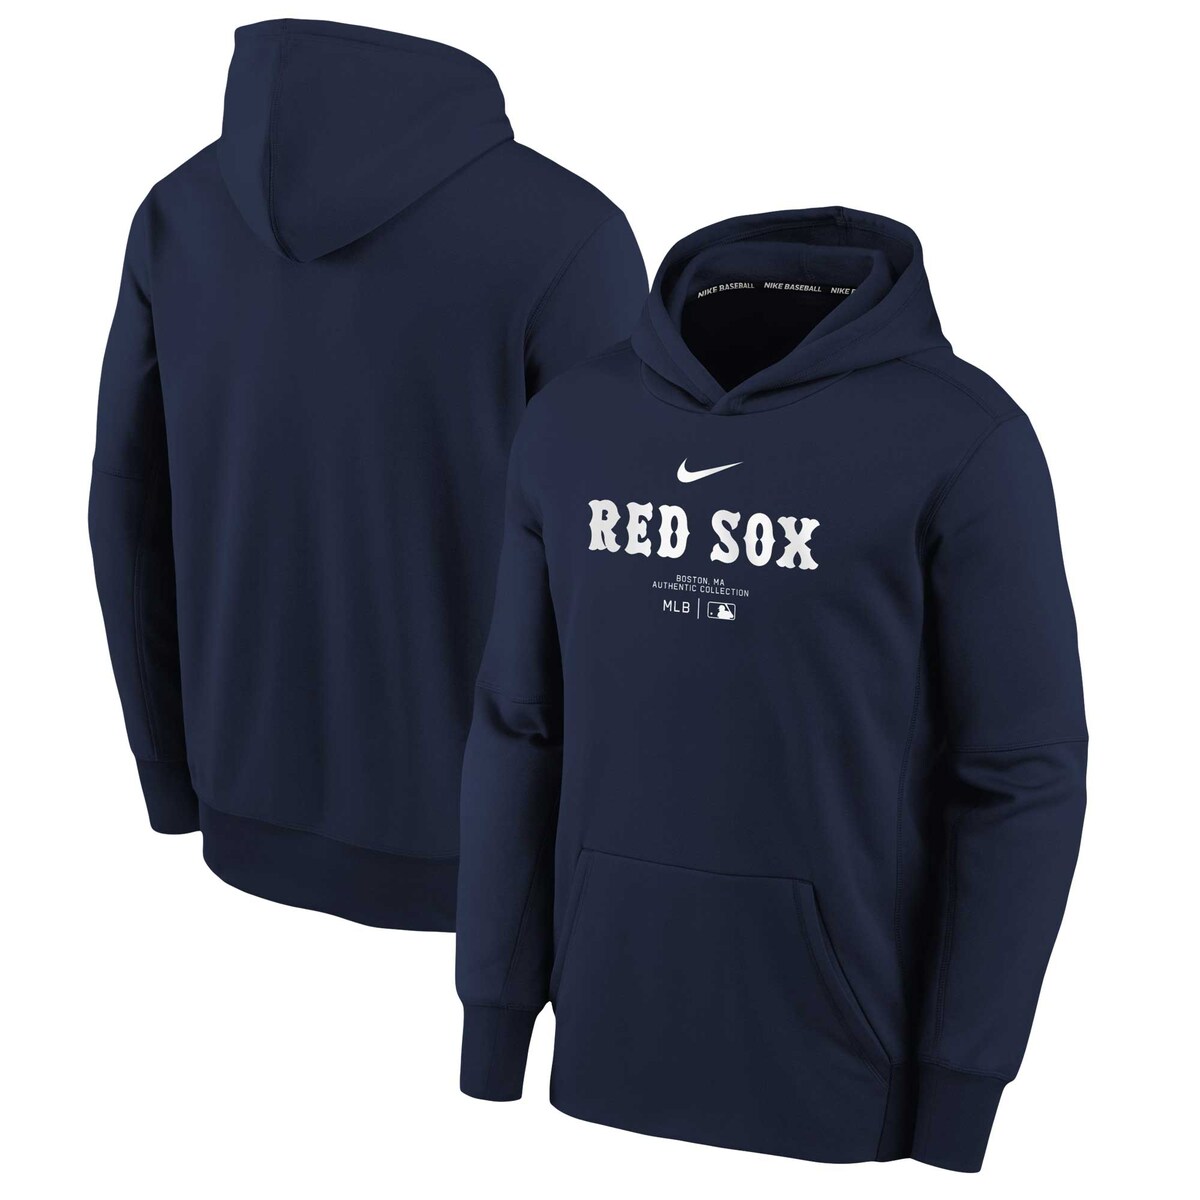 MLB bh\bNX vI[o[ p[J[ Nike iCL LbY lCr[ (YTH AC PRACTICE GRAPHIC THERMA HOOD)